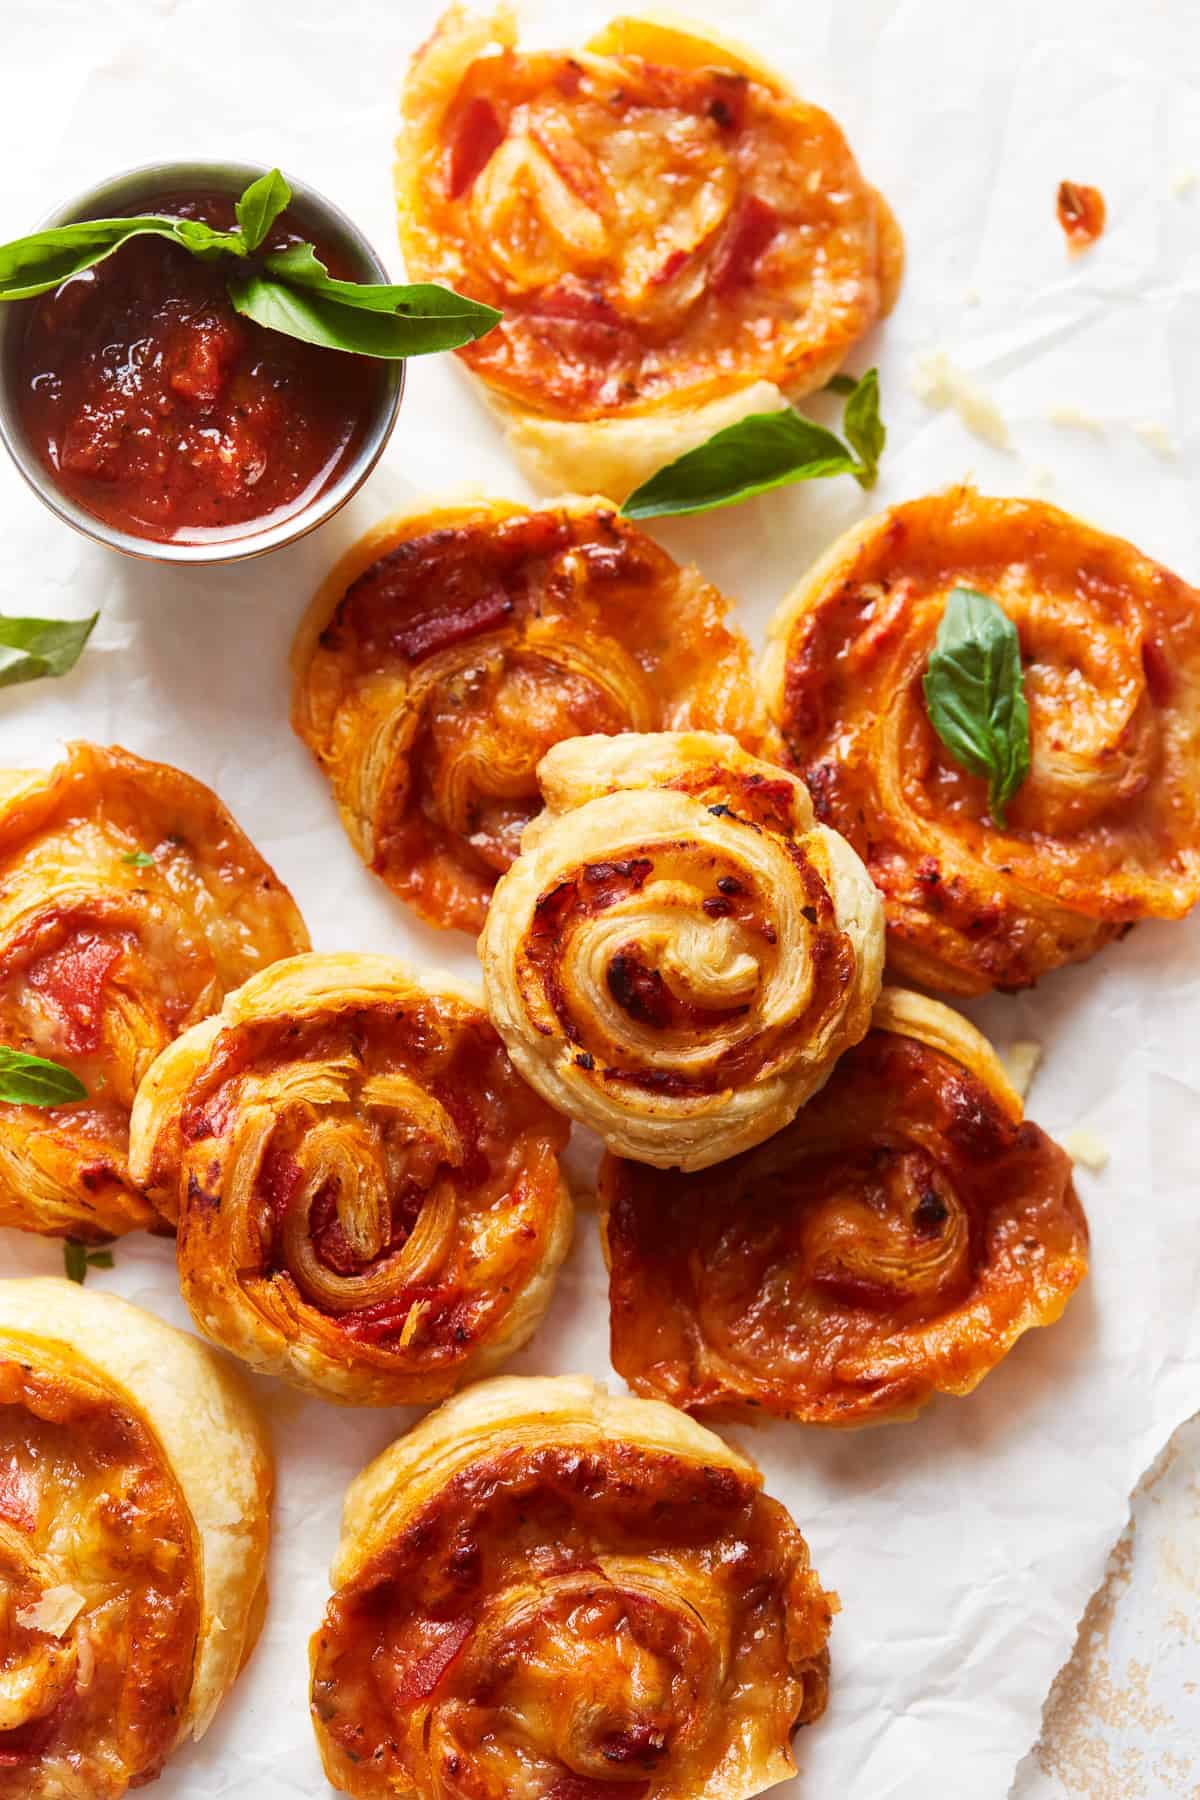 A plate of pizza rolls with tomato sauce and dipping sauce.